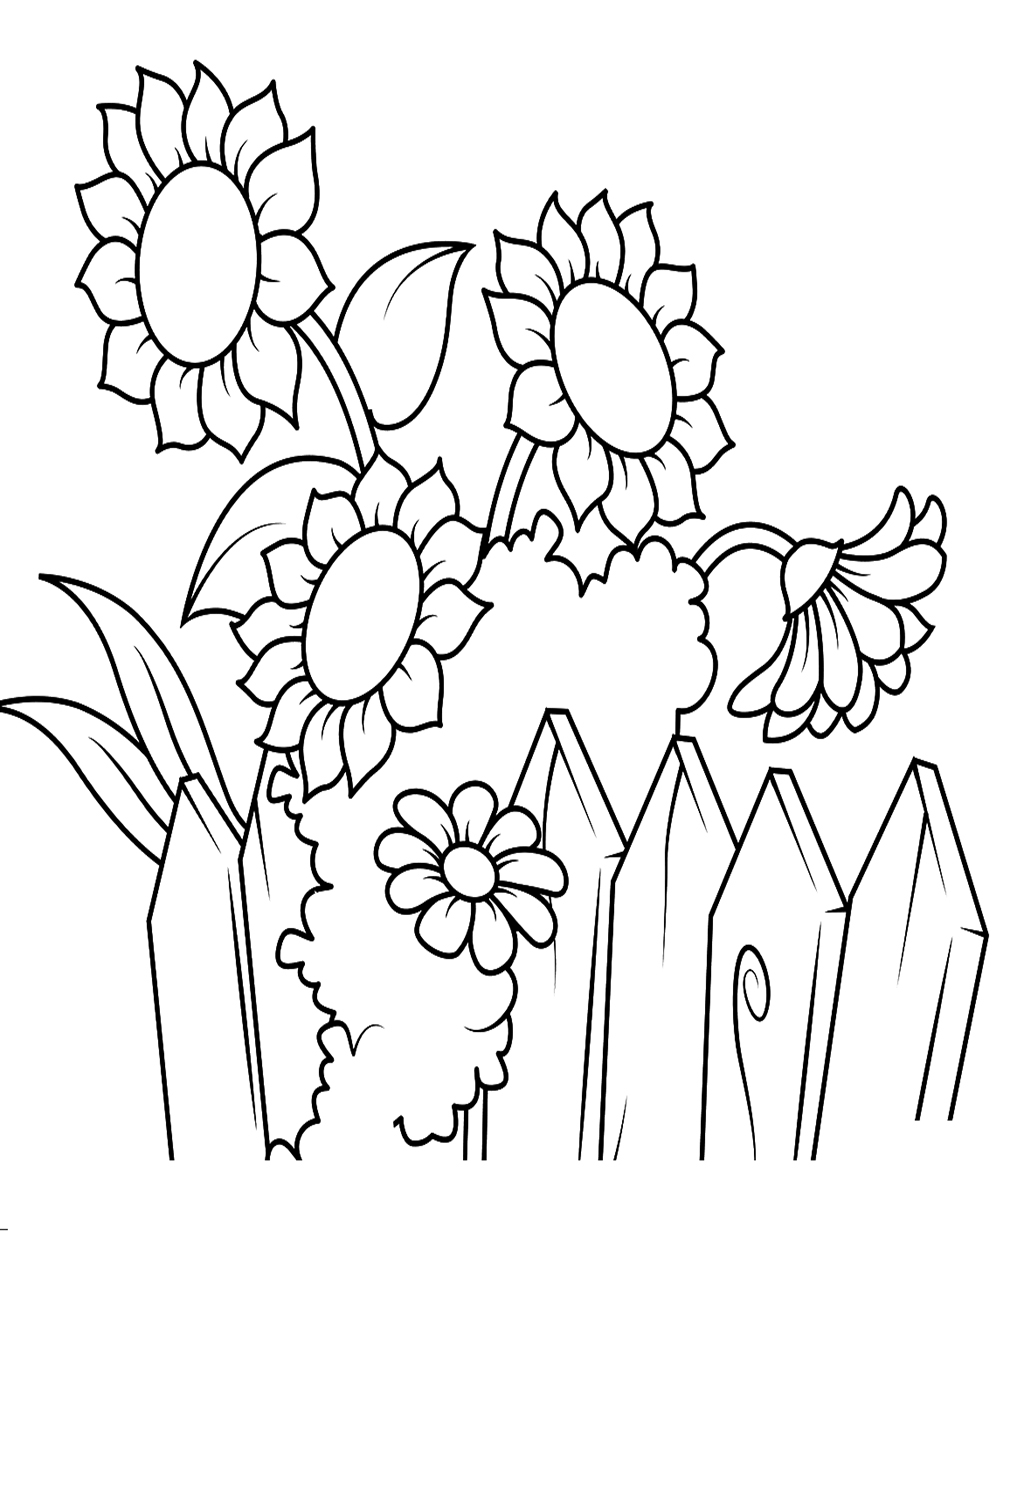 Sunflowers Near The Fence Coloring Page